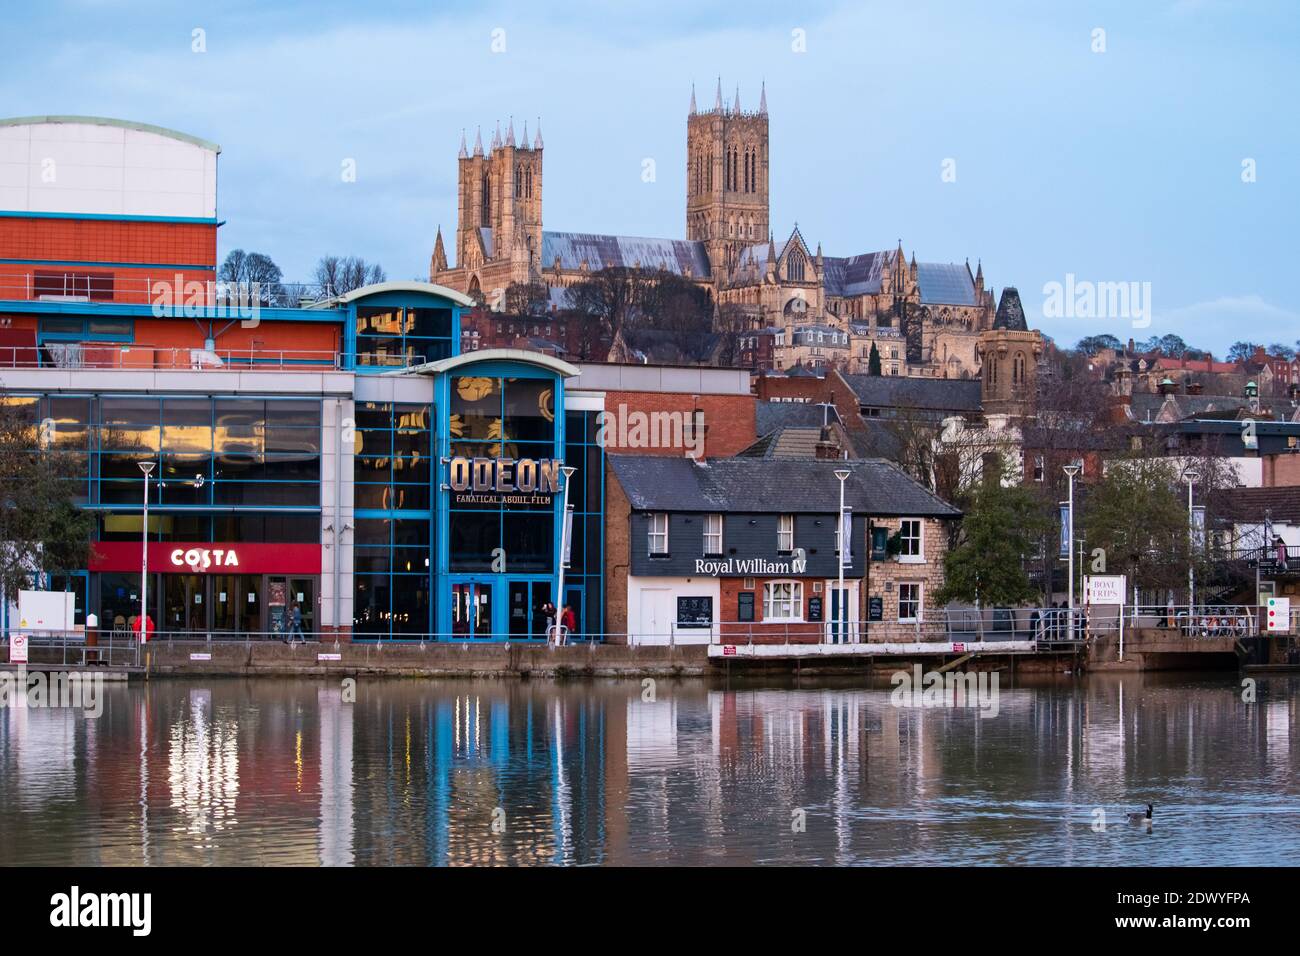 Lincoln Cathedral overlooks Brayford Wharf with Costa Coffee, Odeon and the Royal William !V pub on the edge of the marina. Stock Photo